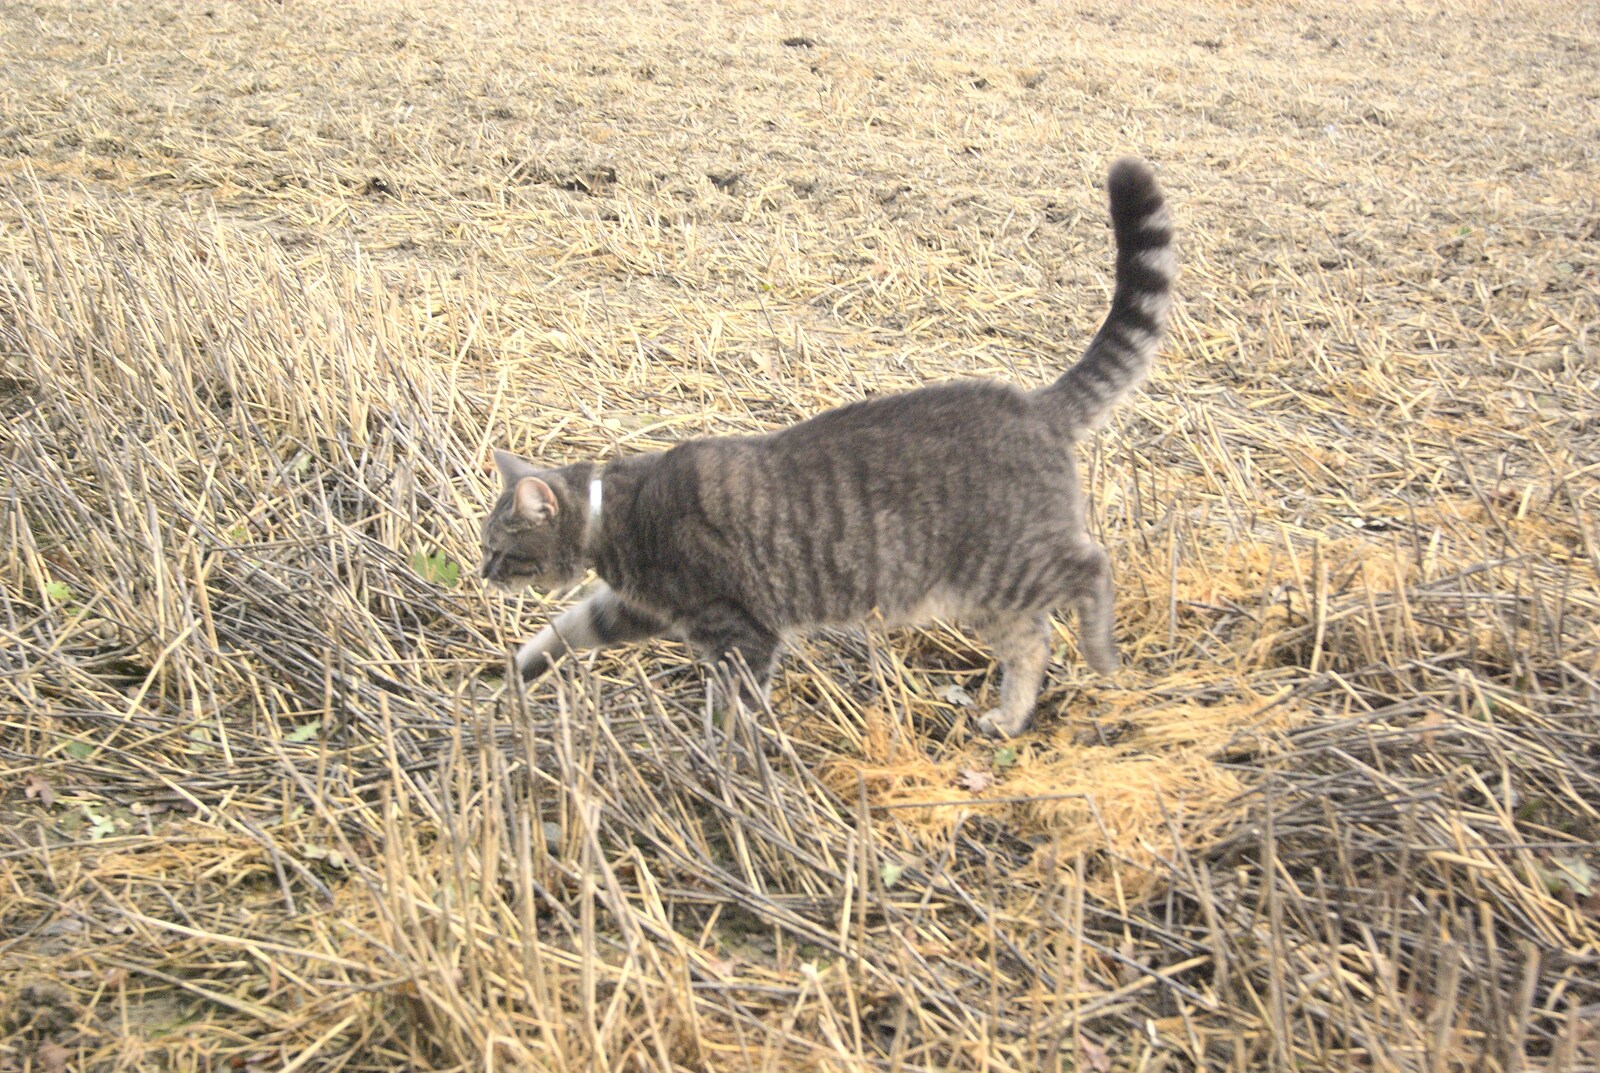 Boris - Stripey Cat - out in the field from Apple Pressing and Amandine's Jazz, Diss, Norfolk - 21st November 2010